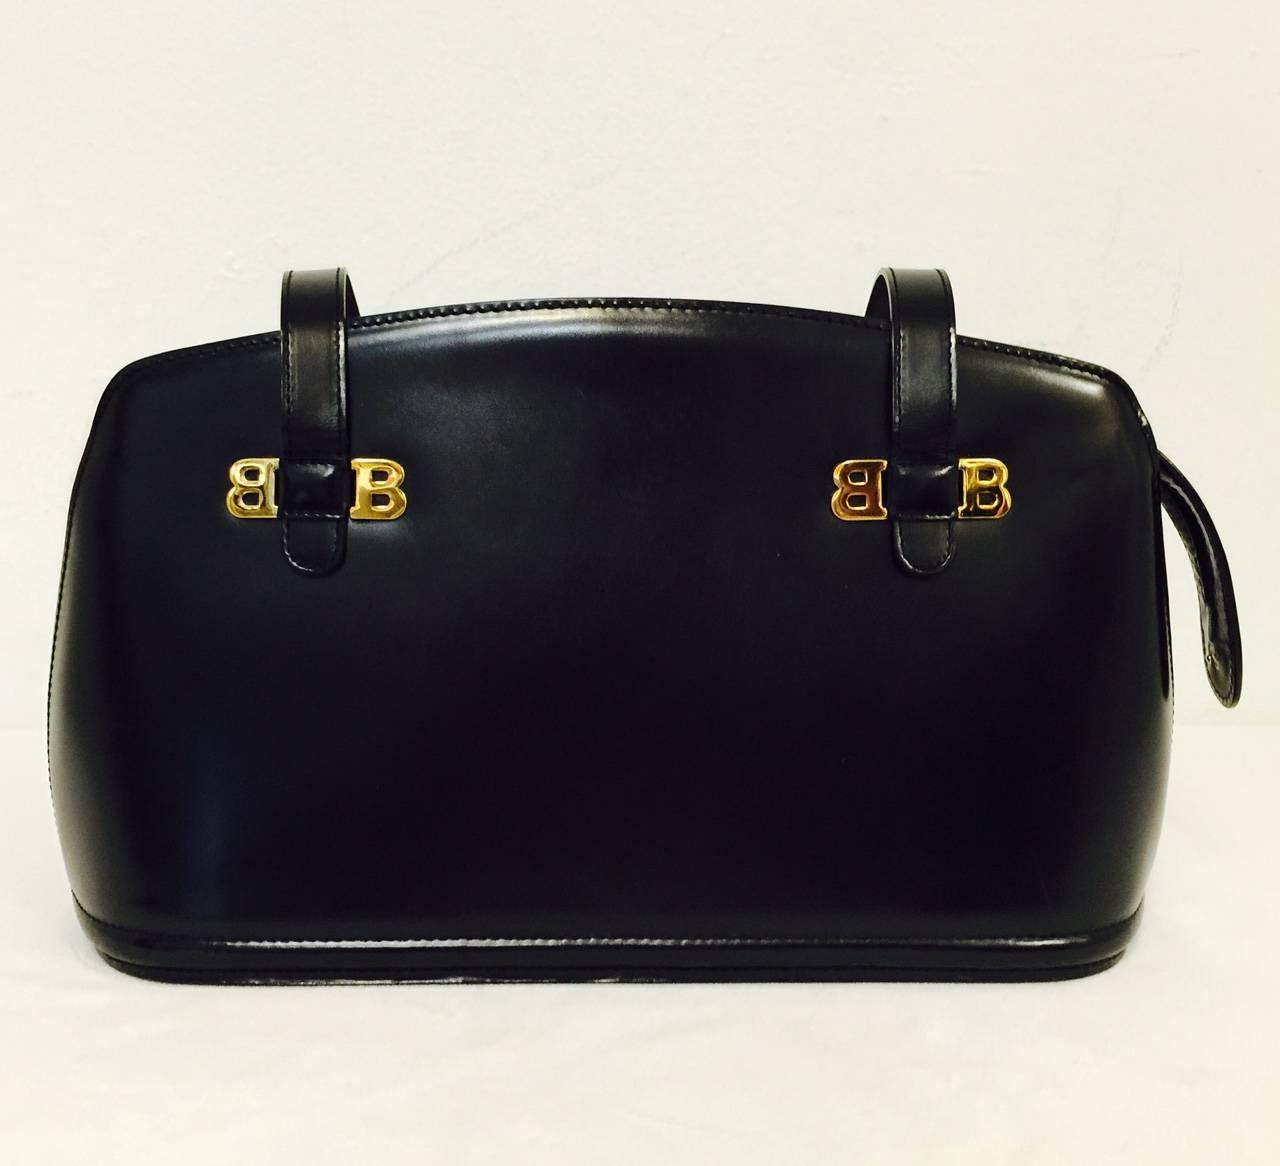 Classic elegance at its best!  Bally Black Leather structured shoulder bag speaks volumes in several languages!  Recognized worldwide for superior leather goods and and other products, Bally is quietly sophisticated and an investment in